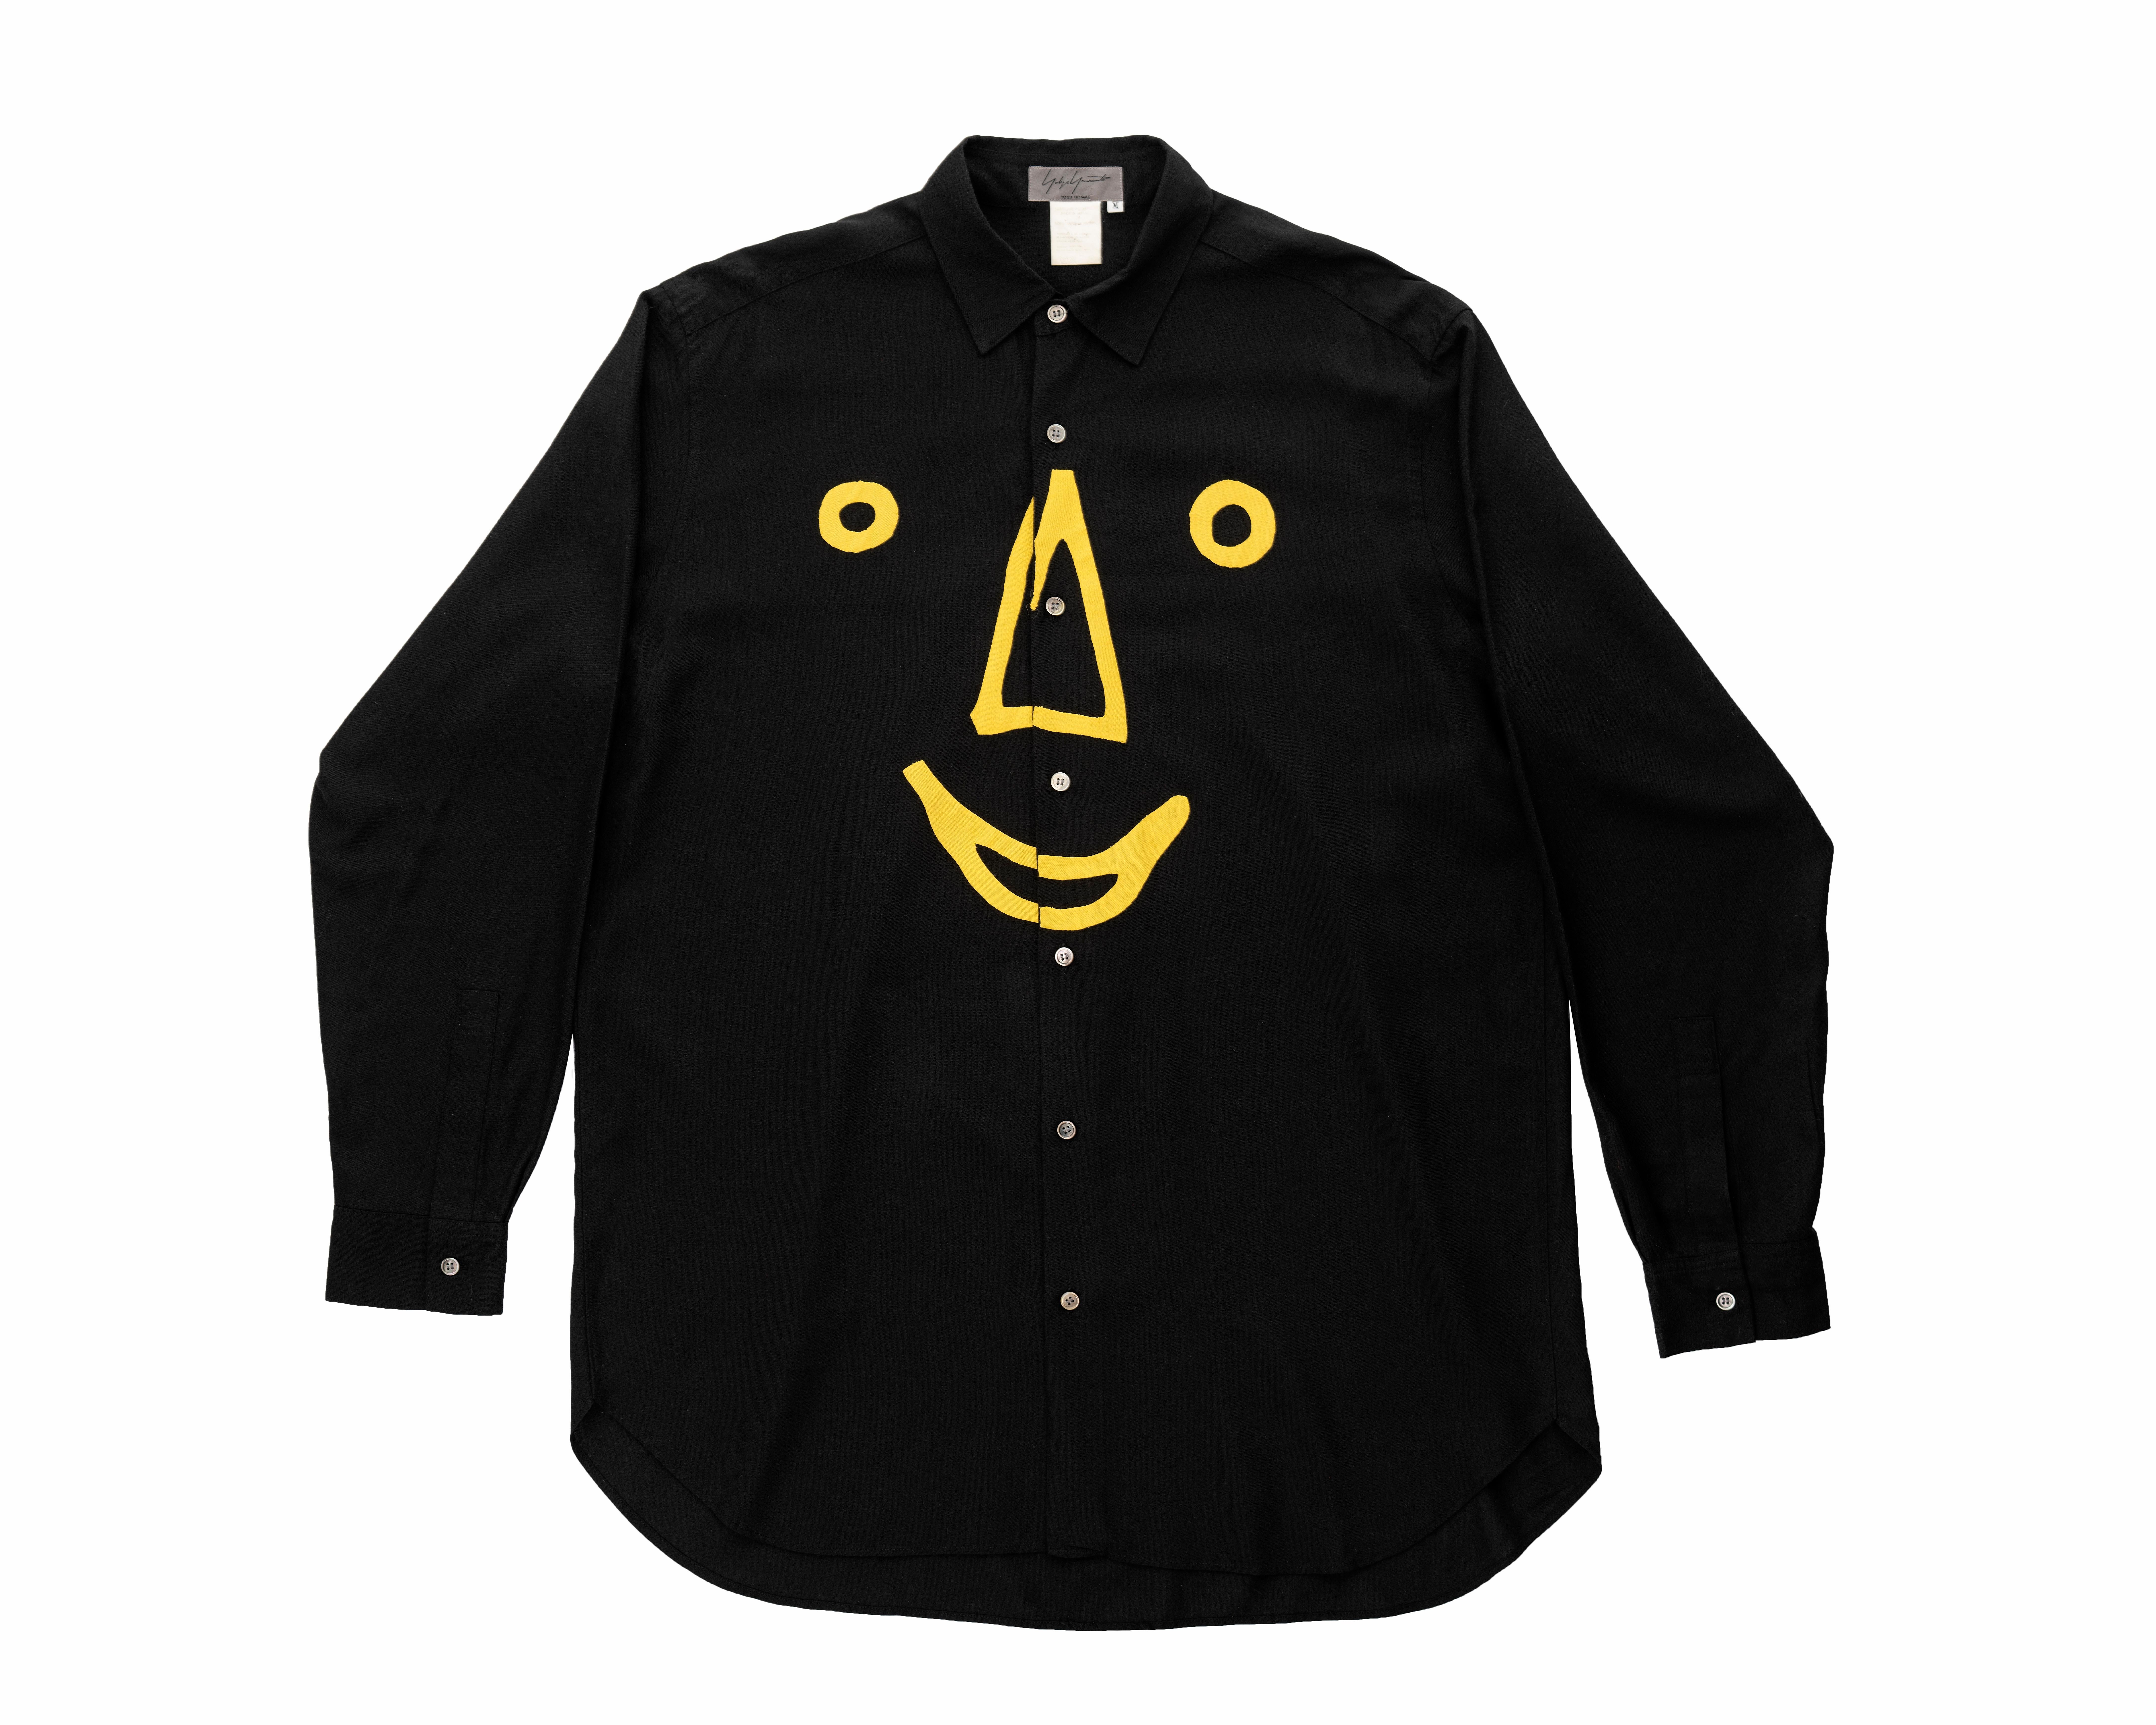 ▪ Yohji Yamamoto Homme rare black rayon shirt
▪ Sold by One of a Kind Archive
▪ Fall-Winter 1991
▪ Appliquéd yellow smiley face
▪ Loose fit 
▪ Classic collar 
▪ Size Medium
▪ Made in Japan

All photographs in this listing EXCLUDING any reference or